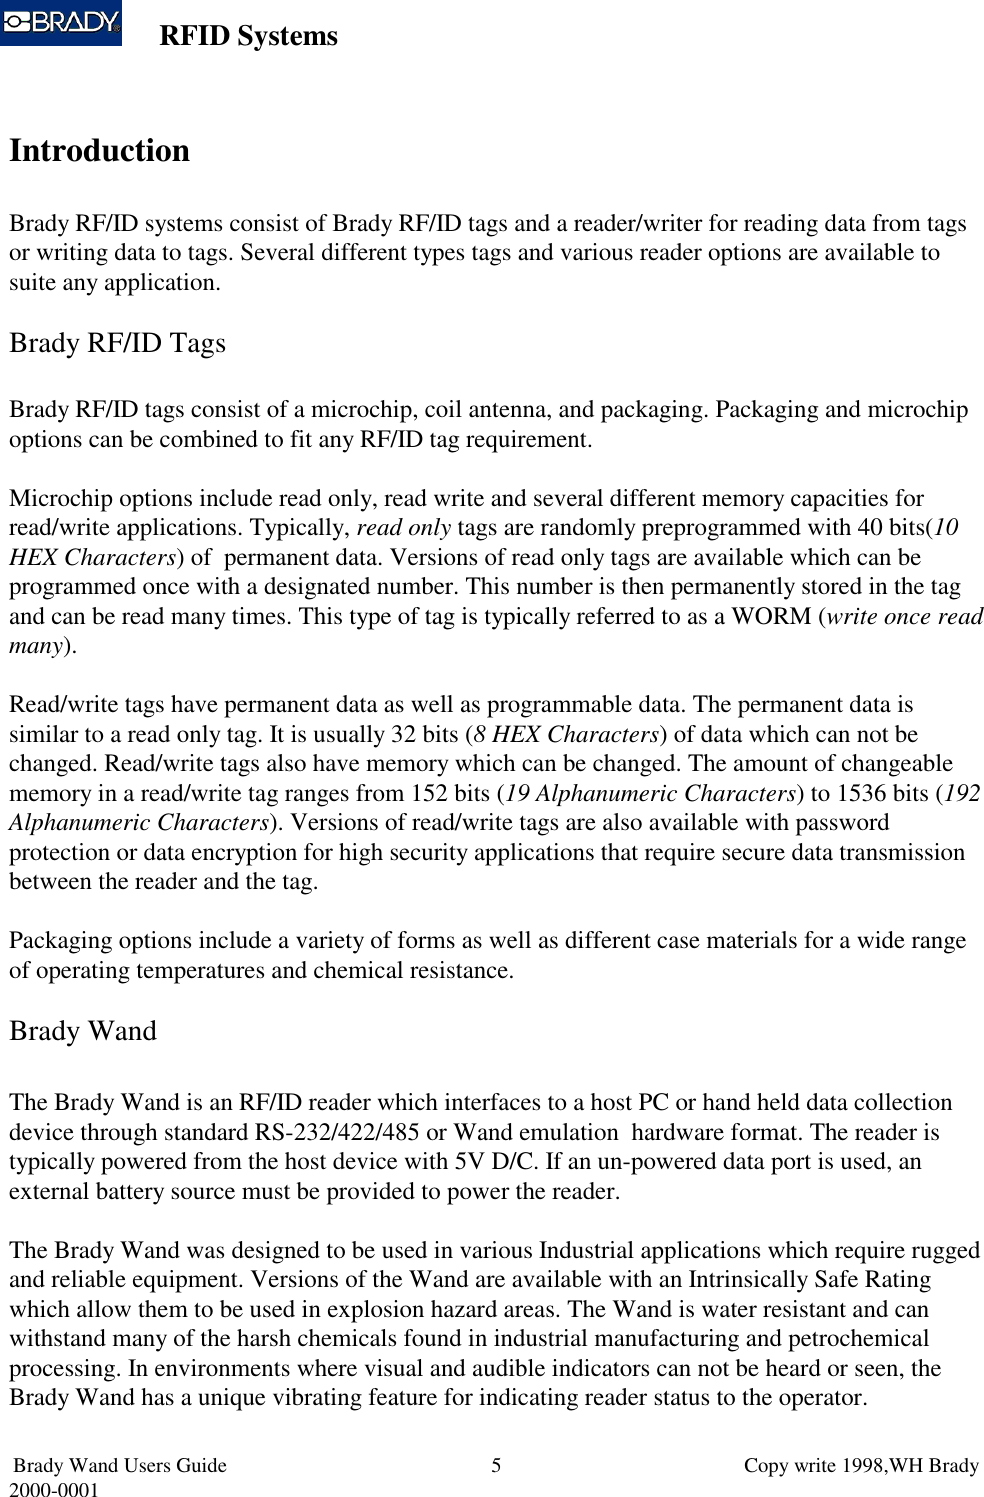 RFID SystemsBrady Wand Users Guide                           Copy write 1998,WH Brady2000-0001 5IntroductionBrady RF/ID systems consist of Brady RF/ID tags and a reader/writer for reading data from tagsor writing data to tags. Several different types tags and various reader options are available tosuite any application.Brady RF/ID TagsBrady RF/ID tags consist of a microchip, coil antenna, and packaging. Packaging and microchipoptions can be combined to fit any RF/ID tag requirement.Microchip options include read only, read write and several different memory capacities forread/write applications. Typically, read only tags are randomly preprogrammed with 40 bits(10HEX Characters) of  permanent data. Versions of read only tags are available which can beprogrammed once with a designated number. This number is then permanently stored in the tagand can be read many times. This type of tag is typically referred to as a WORM (write once readmany).Read/write tags have permanent data as well as programmable data. The permanent data issimilar to a read only tag. It is usually 32 bits (8 HEX Characters) of data which can not bechanged. Read/write tags also have memory which can be changed. The amount of changeablememory in a read/write tag ranges from 152 bits (19 Alphanumeric Characters) to 1536 bits (192Alphanumeric Characters). Versions of read/write tags are also available with passwordprotection or data encryption for high security applications that require secure data transmissionbetween the reader and the tag.Packaging options include a variety of forms as well as different case materials for a wide rangeof operating temperatures and chemical resistance.Brady WandThe Brady Wand is an RF/ID reader which interfaces to a host PC or hand held data collectiondevice through standard RS-232/422/485 or Wand emulation  hardware format. The reader istypically powered from the host device with 5V D/C. If an un-powered data port is used, anexternal battery source must be provided to power the reader.The Brady Wand was designed to be used in various Industrial applications which require ruggedand reliable equipment. Versions of the Wand are available with an Intrinsically Safe Ratingwhich allow them to be used in explosion hazard areas. The Wand is water resistant and canwithstand many of the harsh chemicals found in industrial manufacturing and petrochemicalprocessing. In environments where visual and audible indicators can not be heard or seen, theBrady Wand has a unique vibrating feature for indicating reader status to the operator.